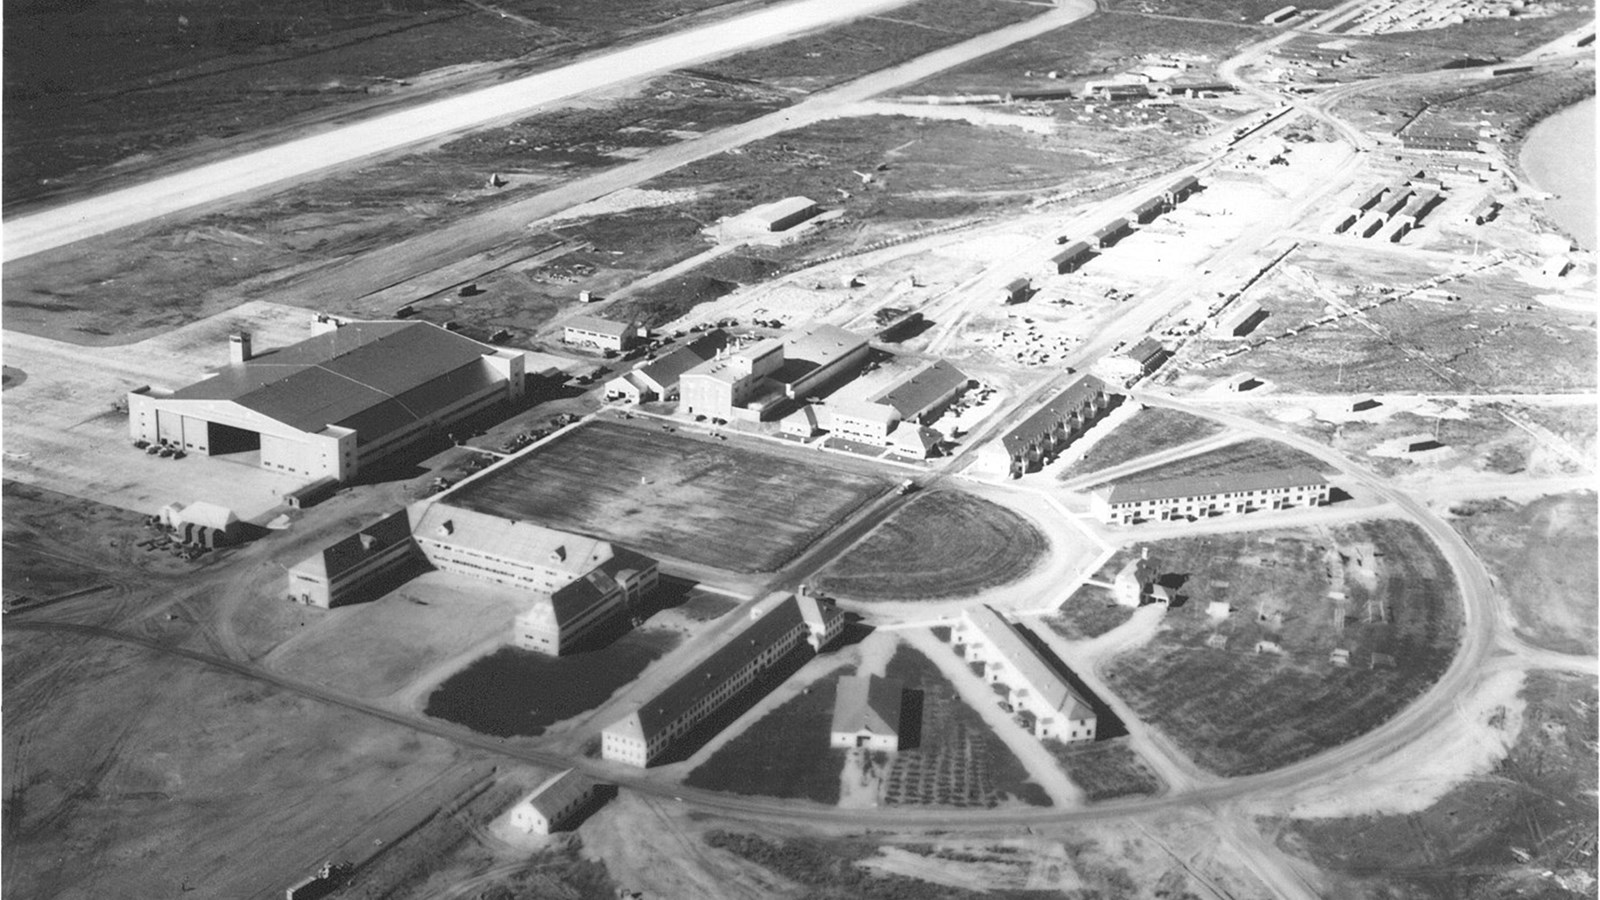 A historic aerial photo of Ladd Field hangars and runways